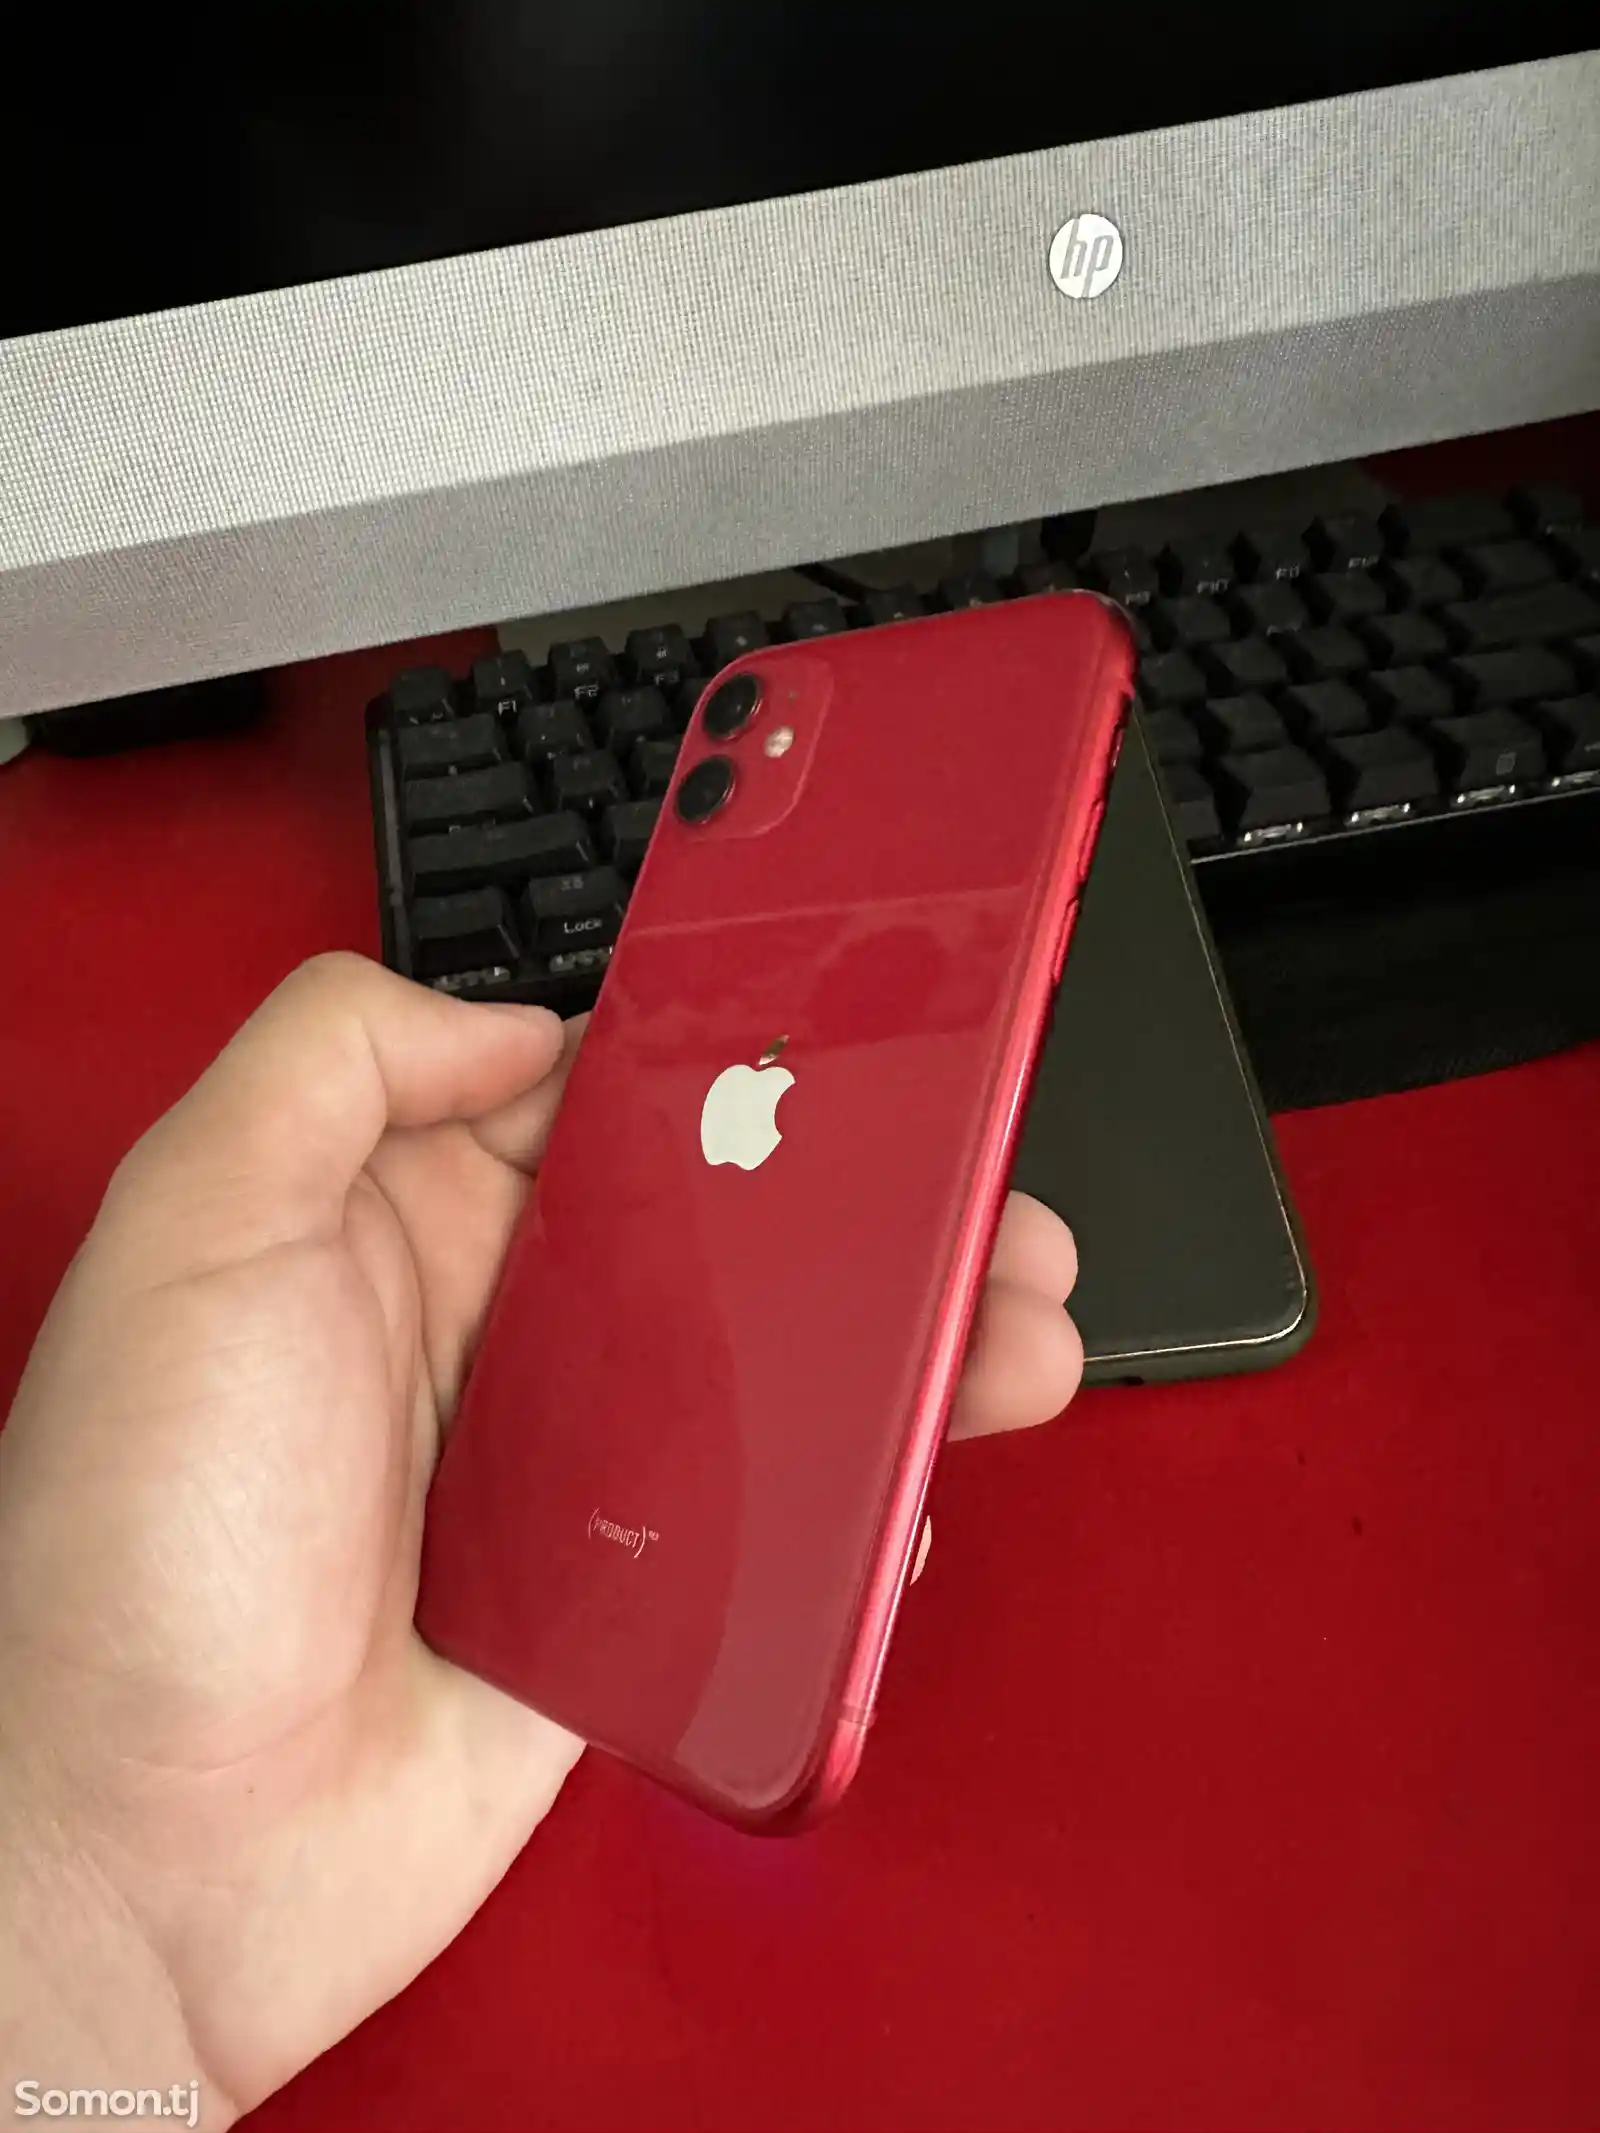 Apple iPhone 11, 64 gb, Product Red-3